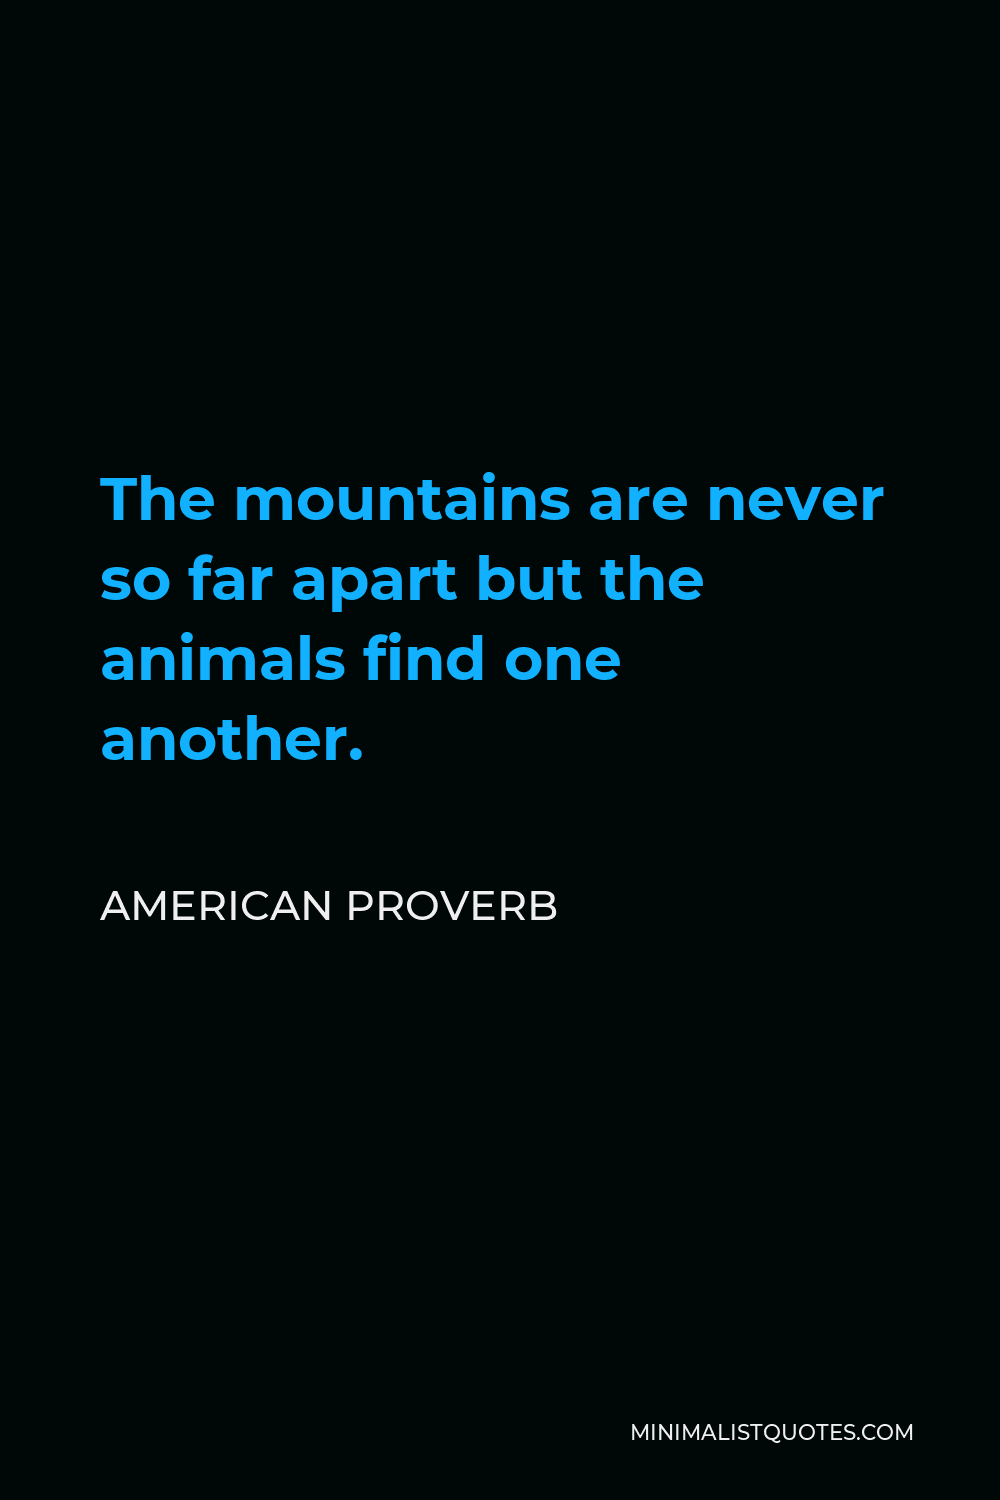 American Proverb Quote - The mountains are never so far apart but the animals find one another.